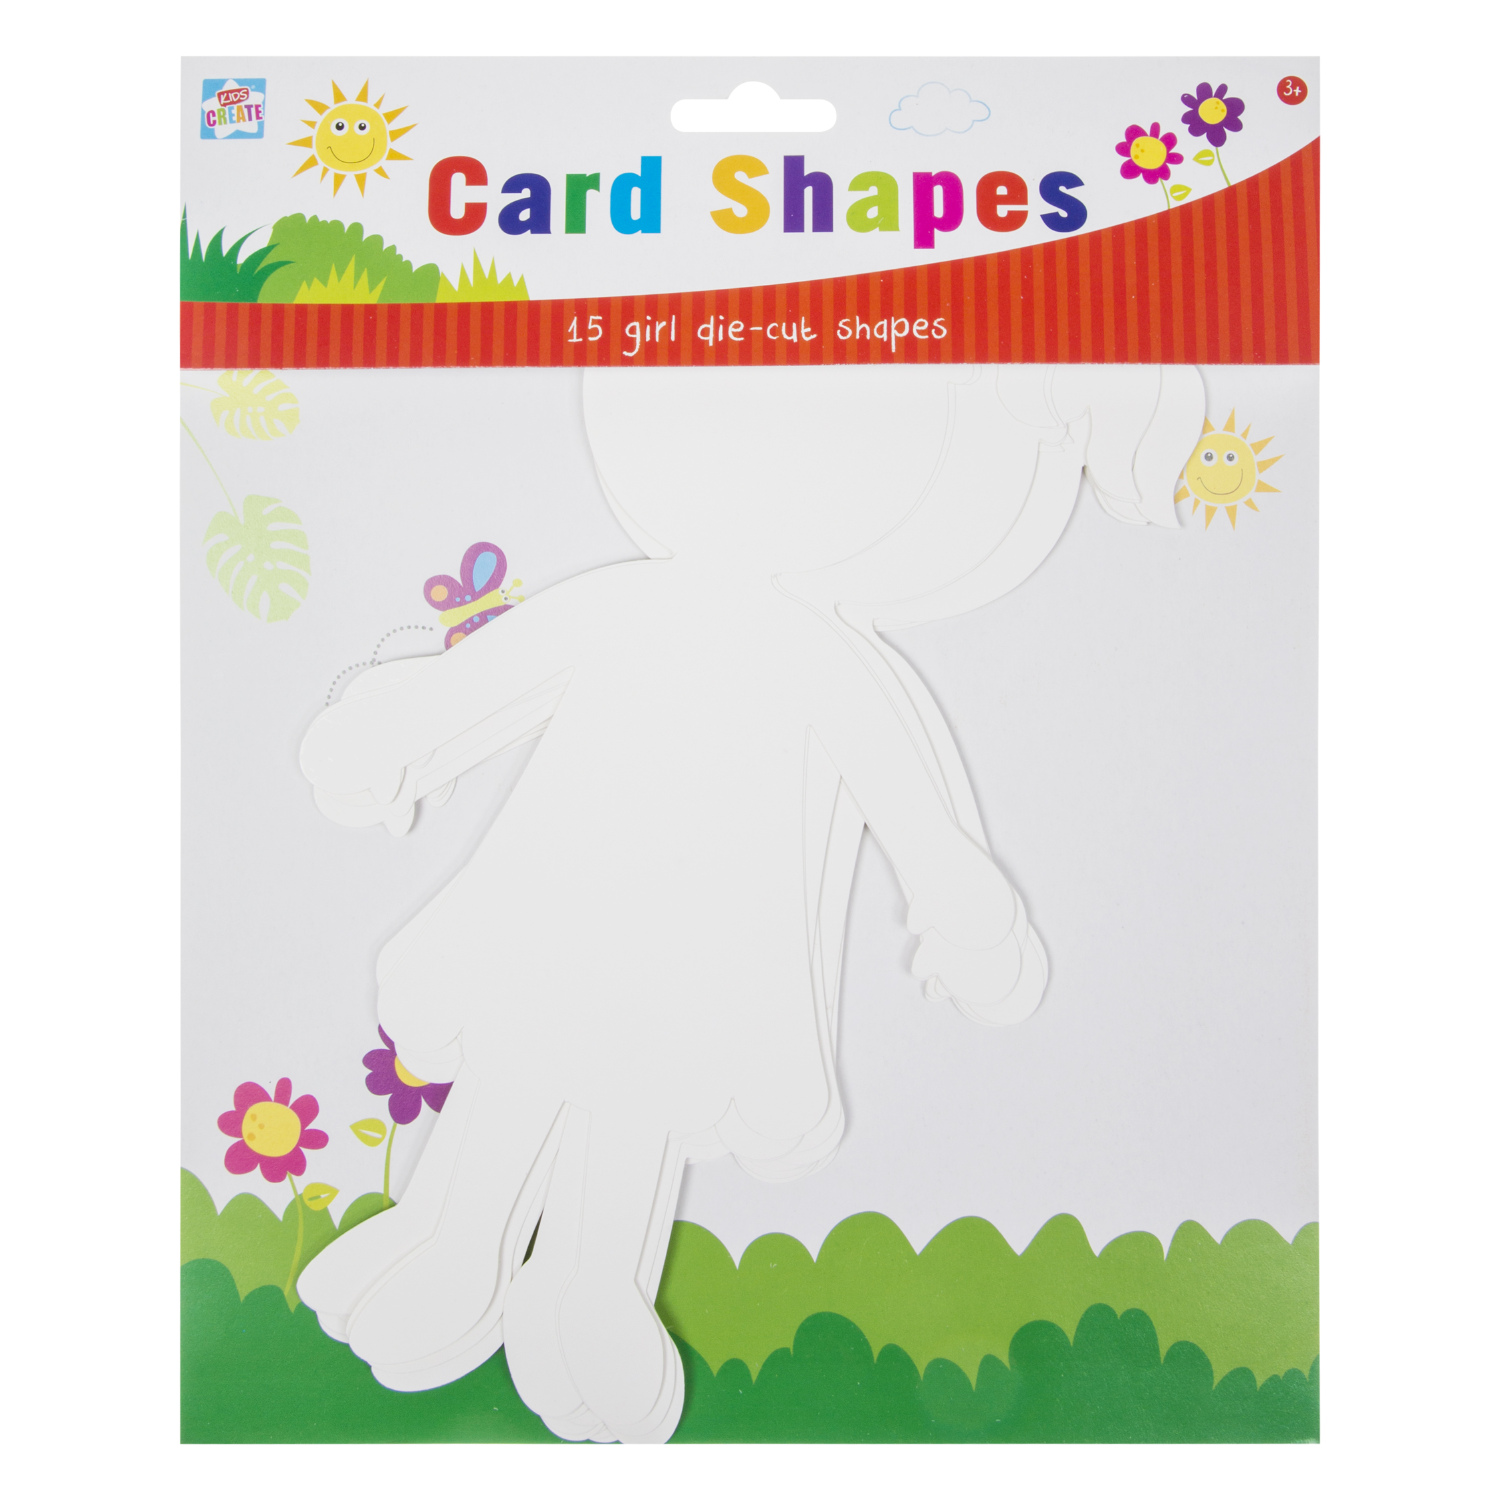 Childrens Shaped Cards Image